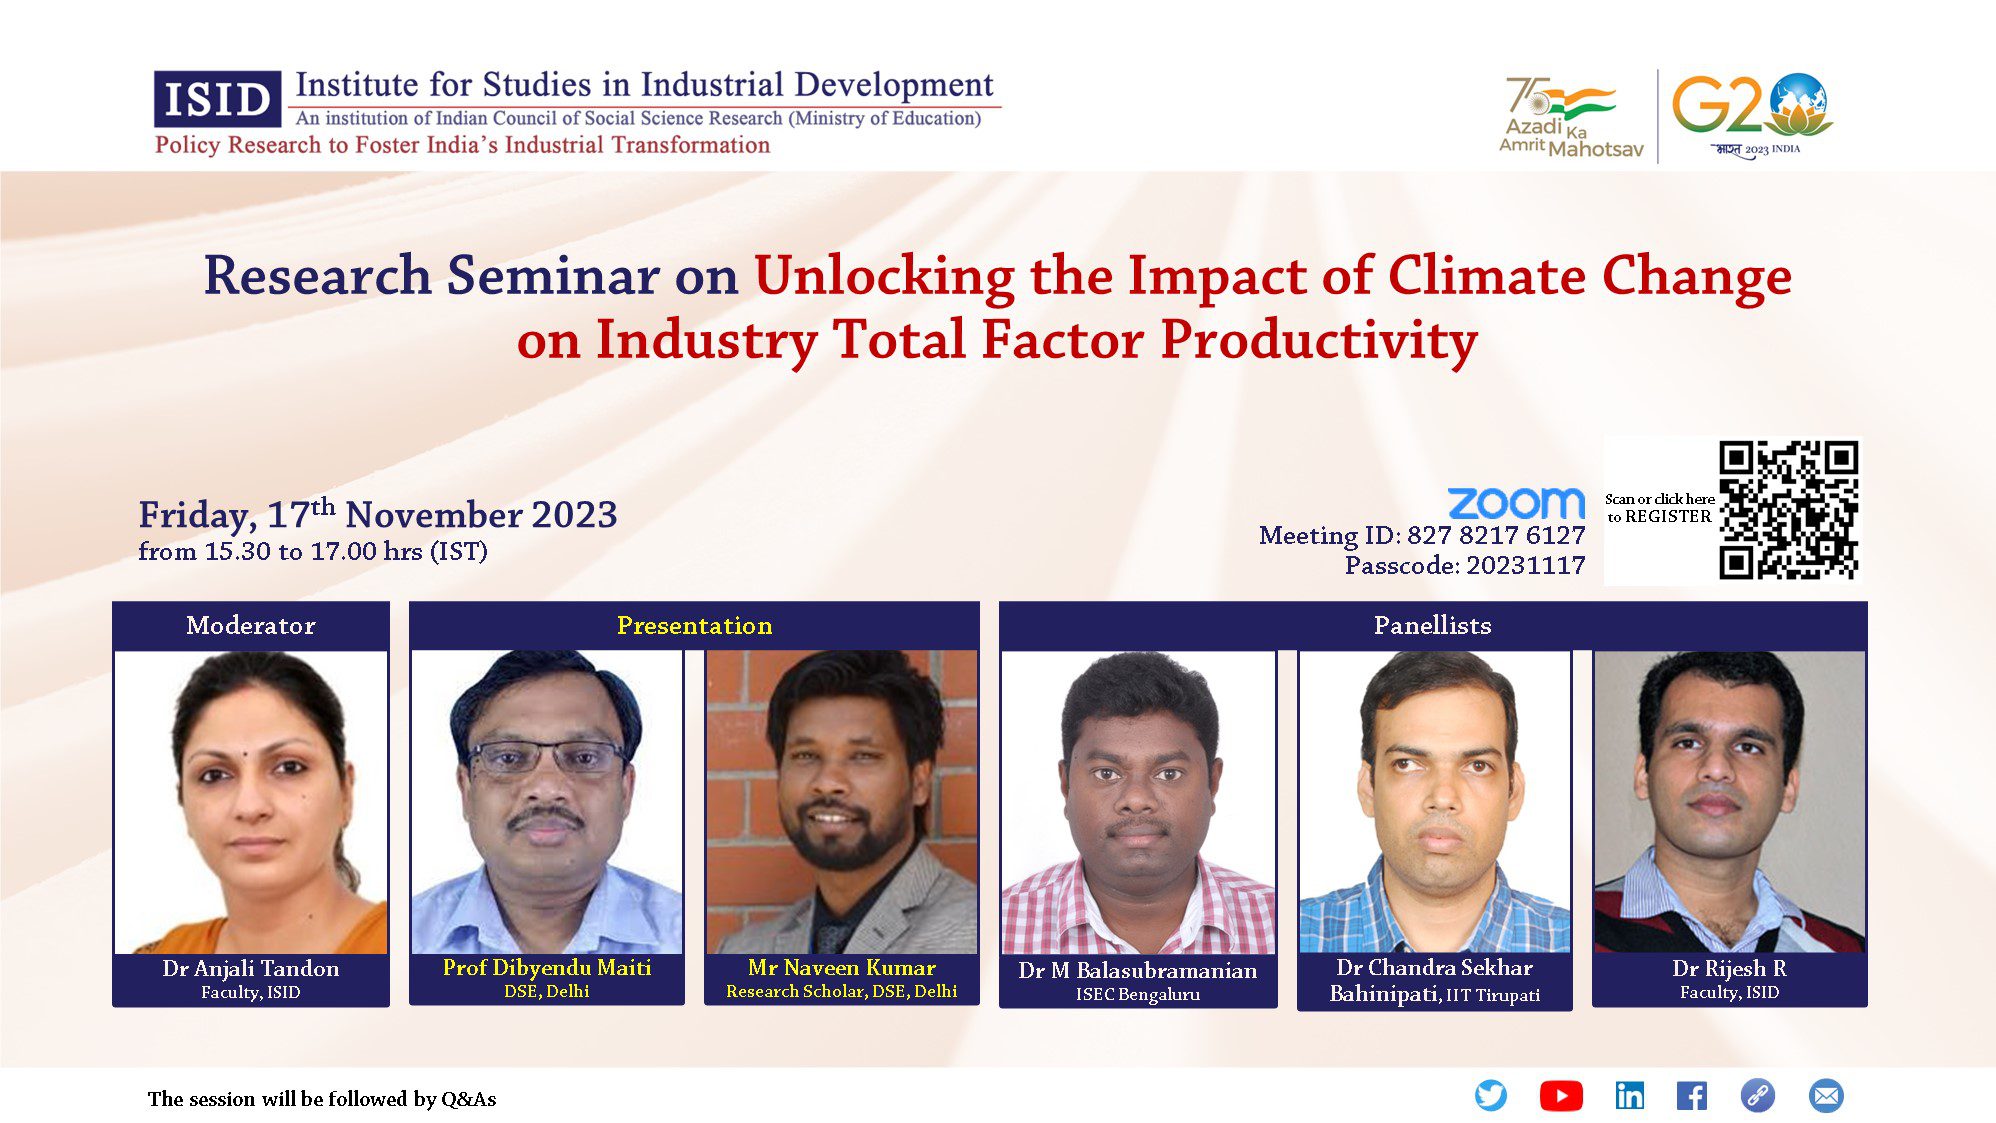 Unlocking the Impact of Climate Change on Industry Total Factor Productivity